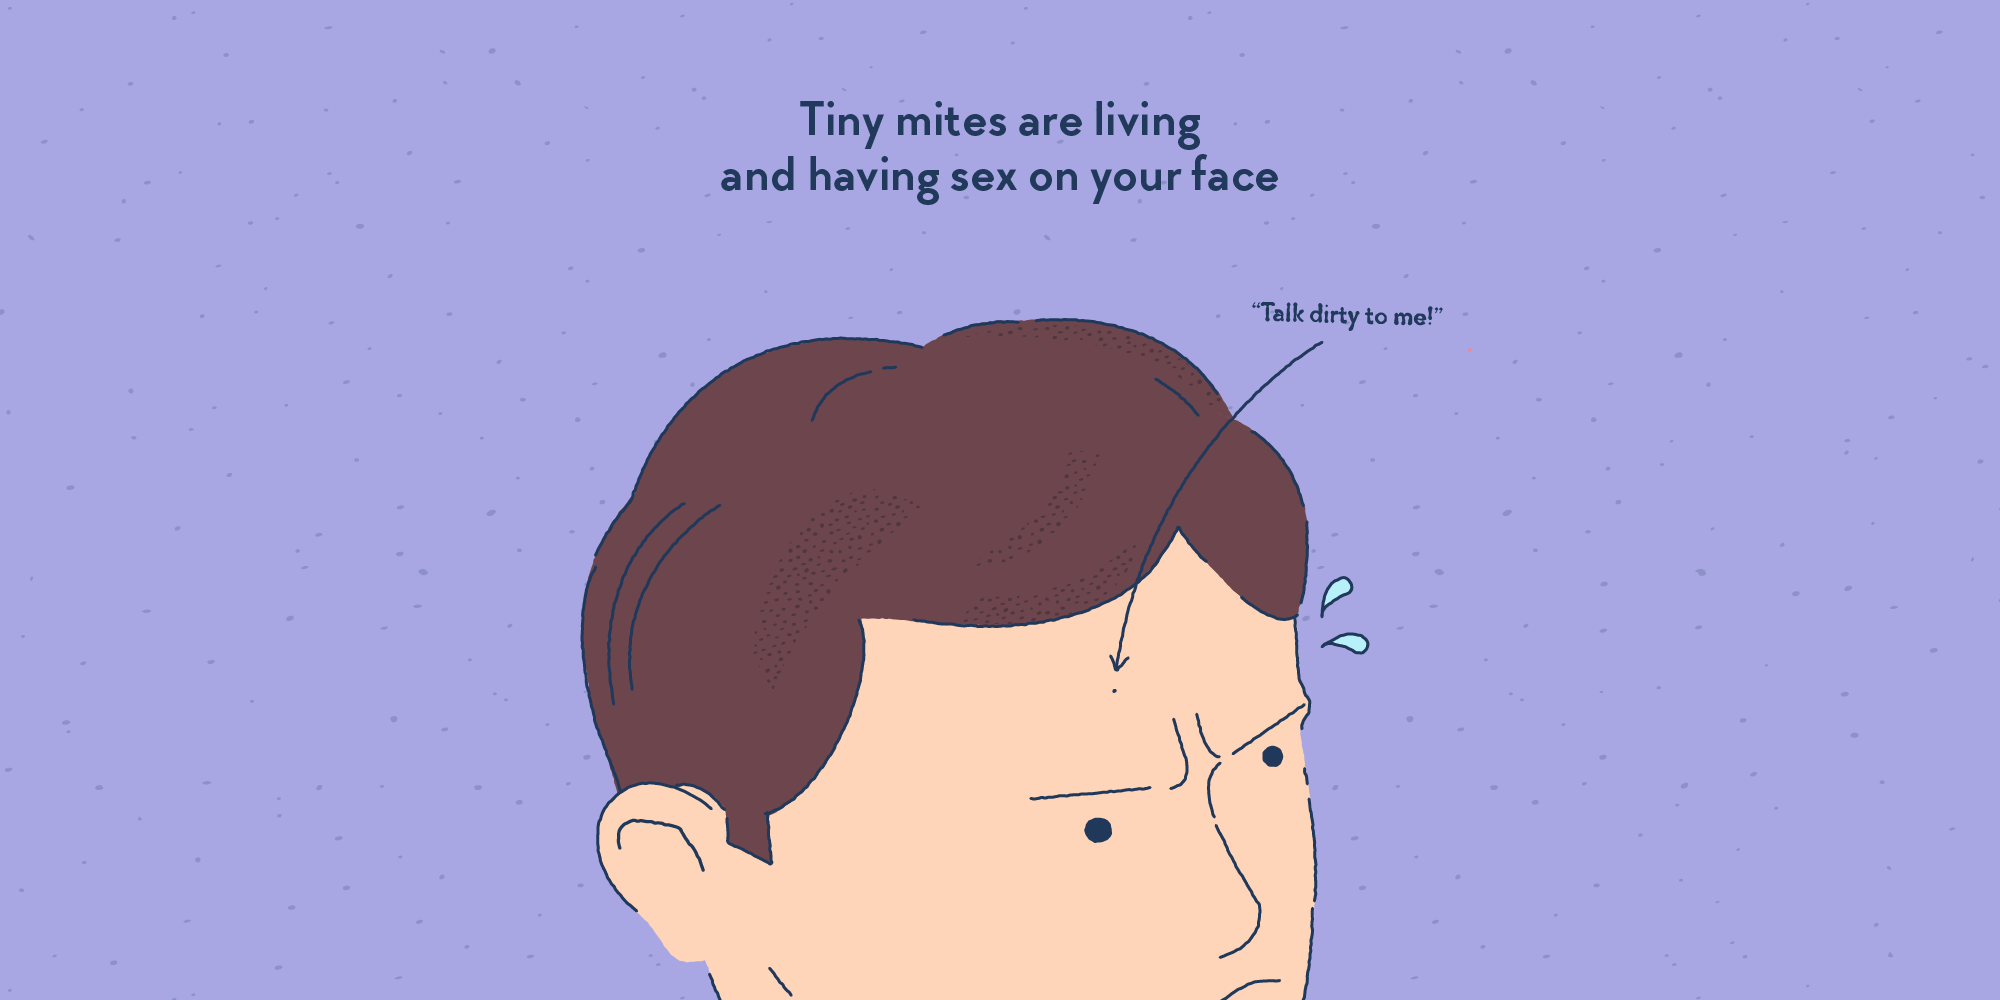 The face of a man, on the forehead of whom a little dot can be seen. A speech bubble emanating from the dot read: “Talk dirty to me!”.